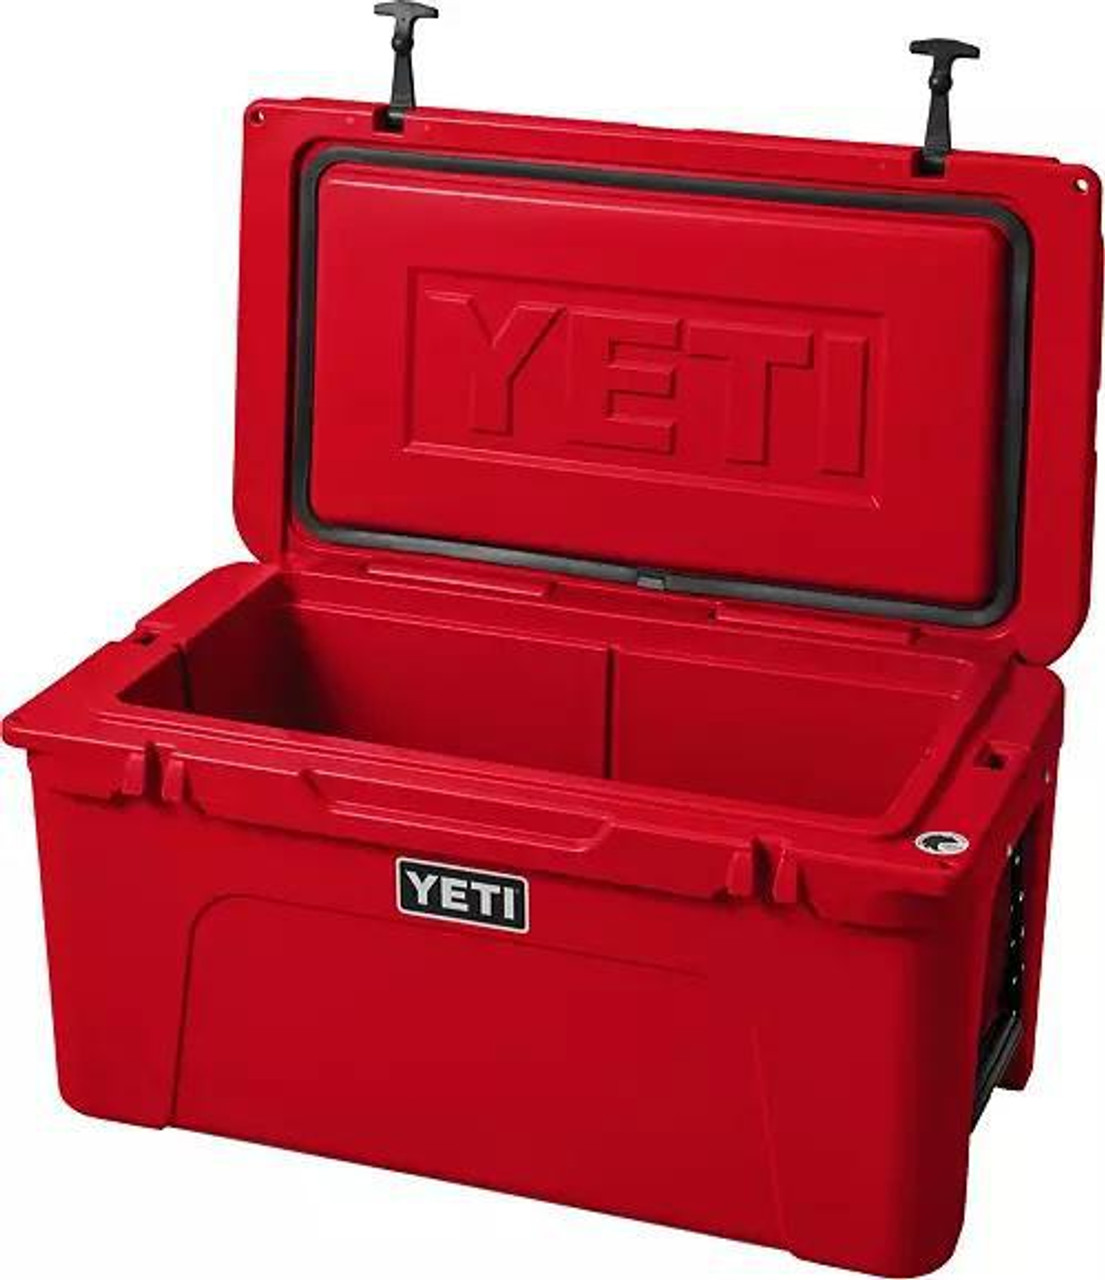 Joseph's Clothier — Limited Edition Yeti 65 Red